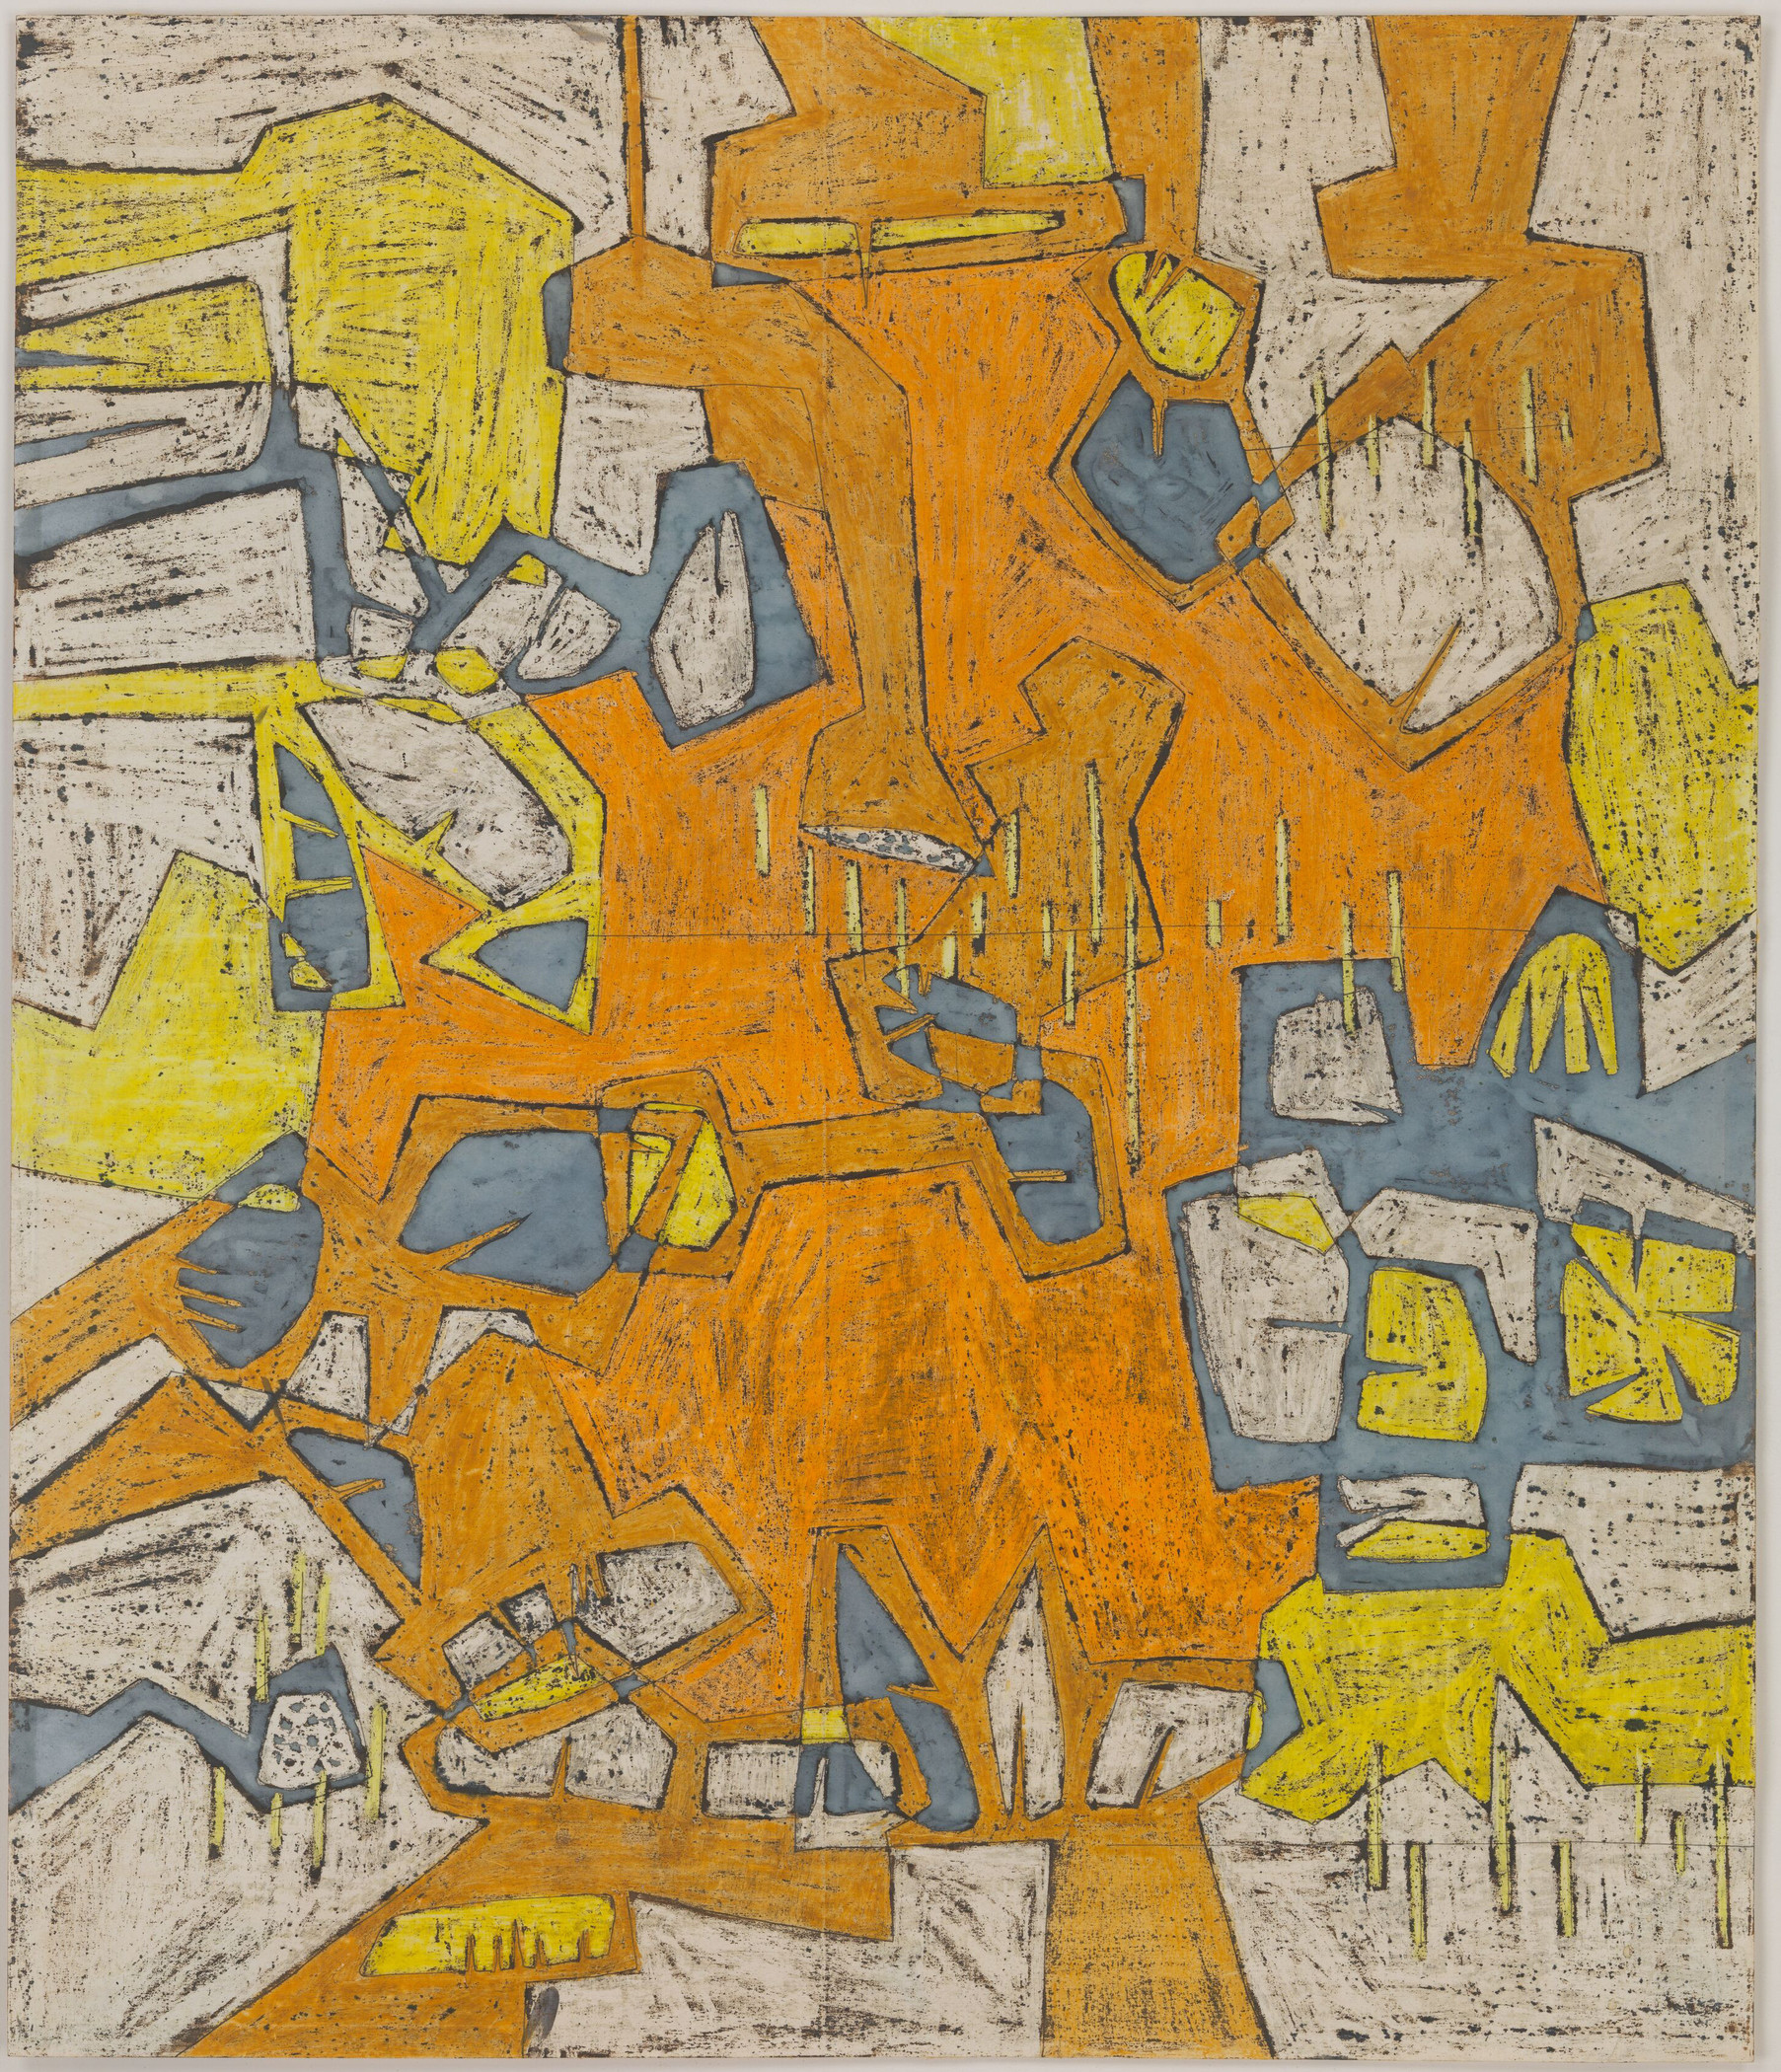 An example of Hurtado’s dynamic use of crayon and ink. Luchita Hurtado, Untitled, c. 1950, courtesy the artist and Hauser & Wirth, © Luchita Hurtado, photo: Genevieve Hanson